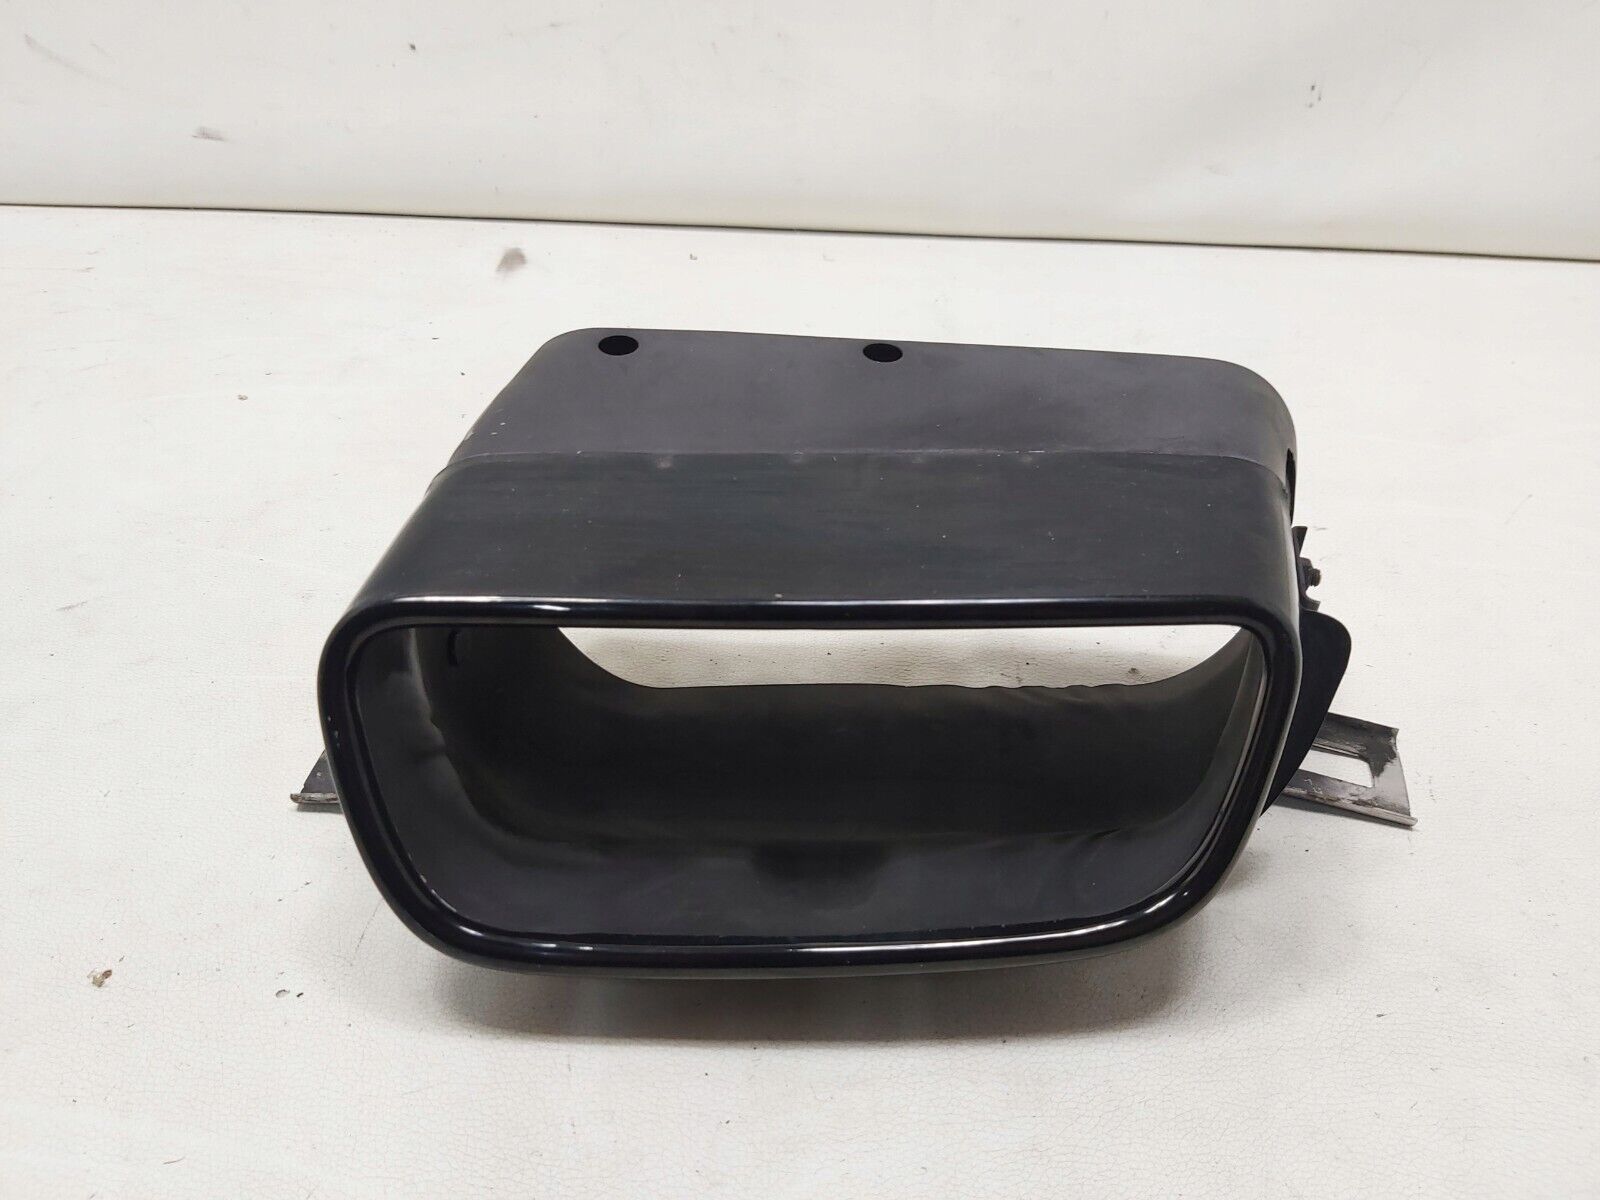 ROLLS-ROYCE GHOST WRAITH 7442225 REAR EXHAUST PIPE COVER